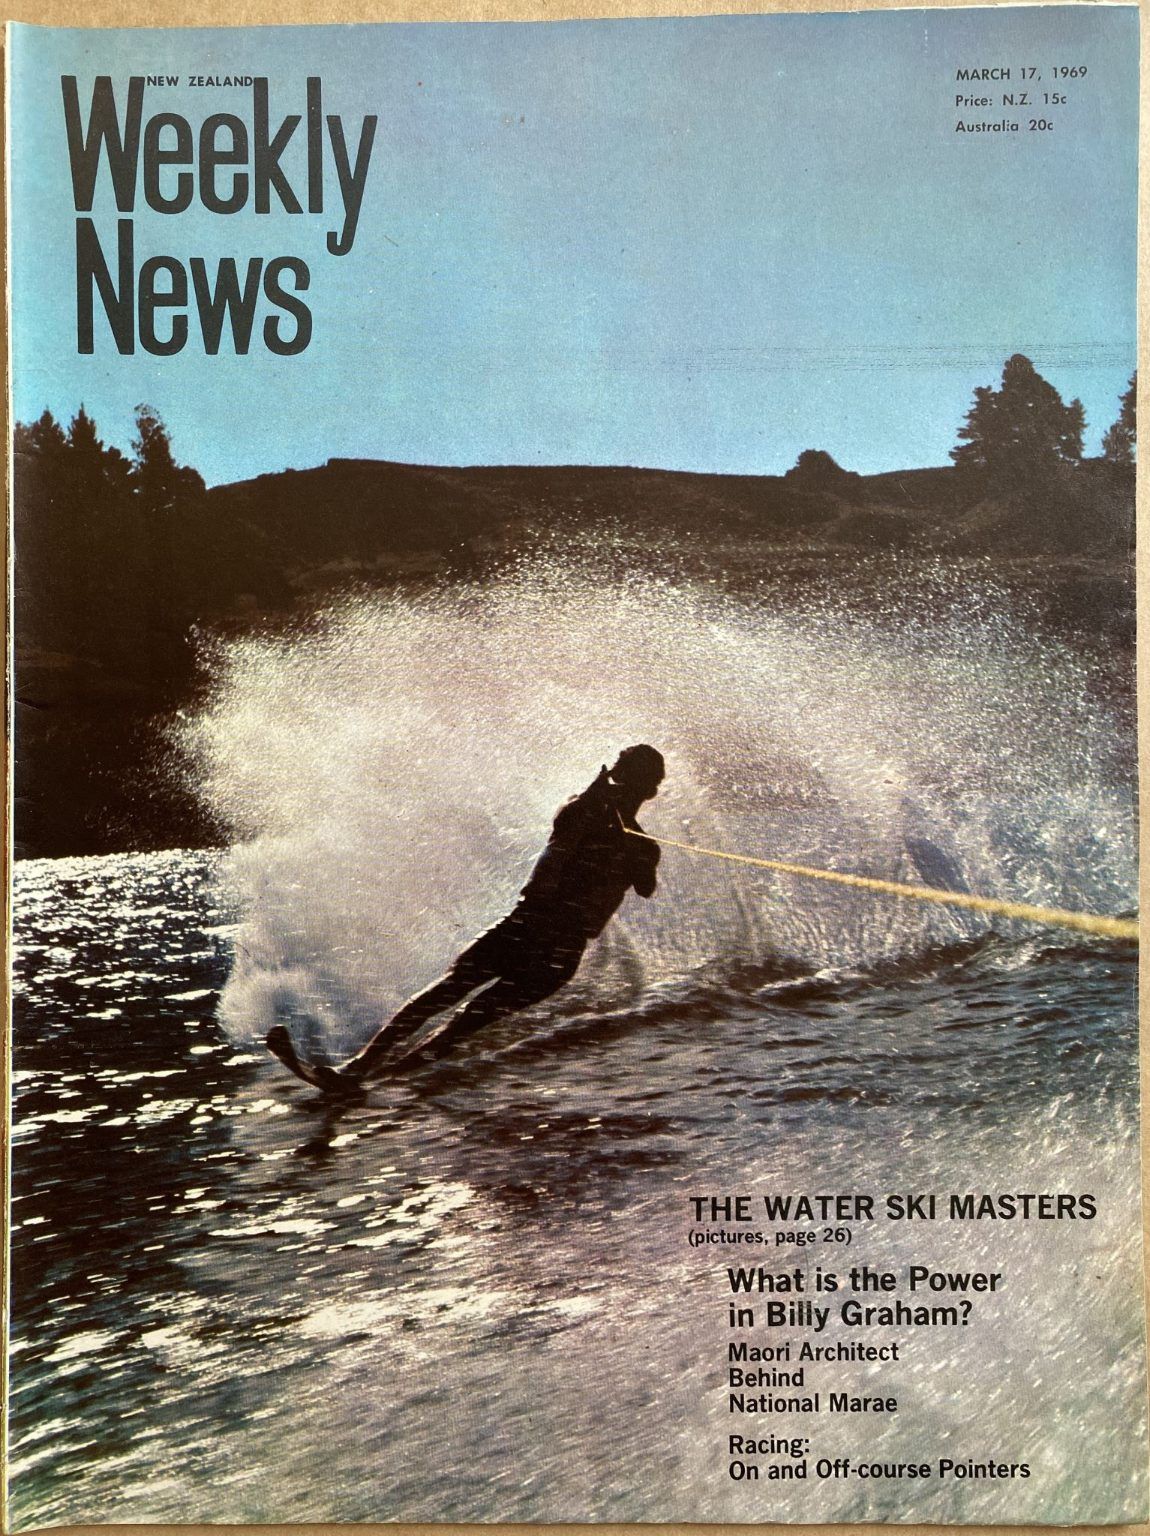 OLD NEWSPAPER: New Zealand Weekly News, No. 5494, 17 March 1969